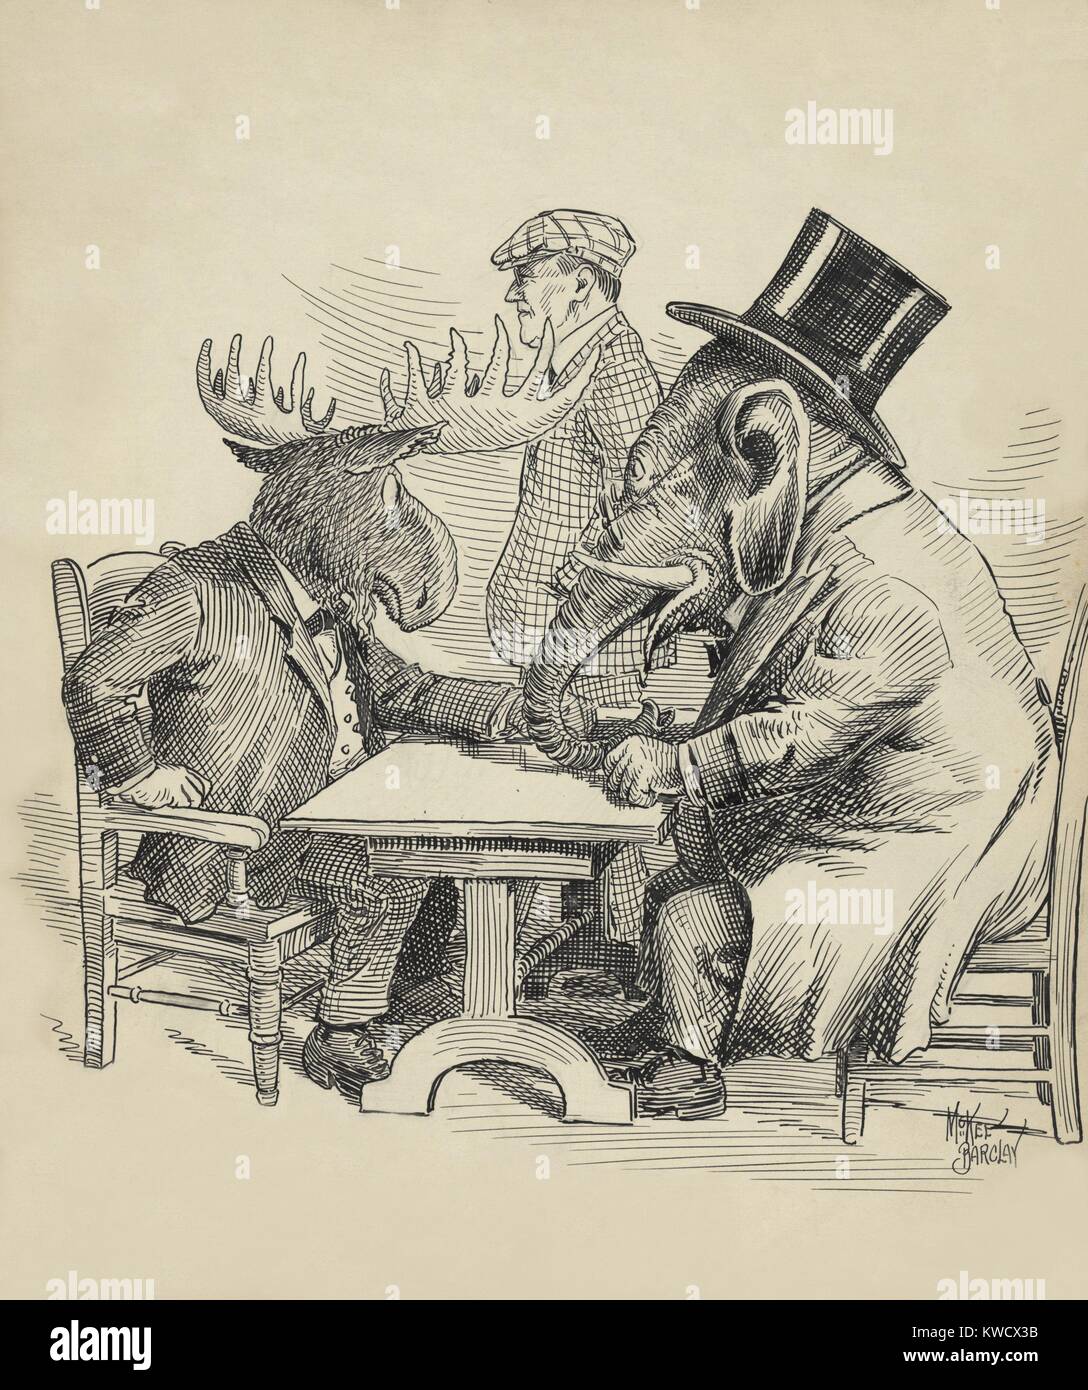 Political cartoon about the 1912 Presidential election by Barclay McKee. The Republican Elephant conferences with Theodore Roosevelts rebellious Bull Moose, as Democrat Woodrow Wilson walks by (BSLOC 2017 2 130) Stock Photo